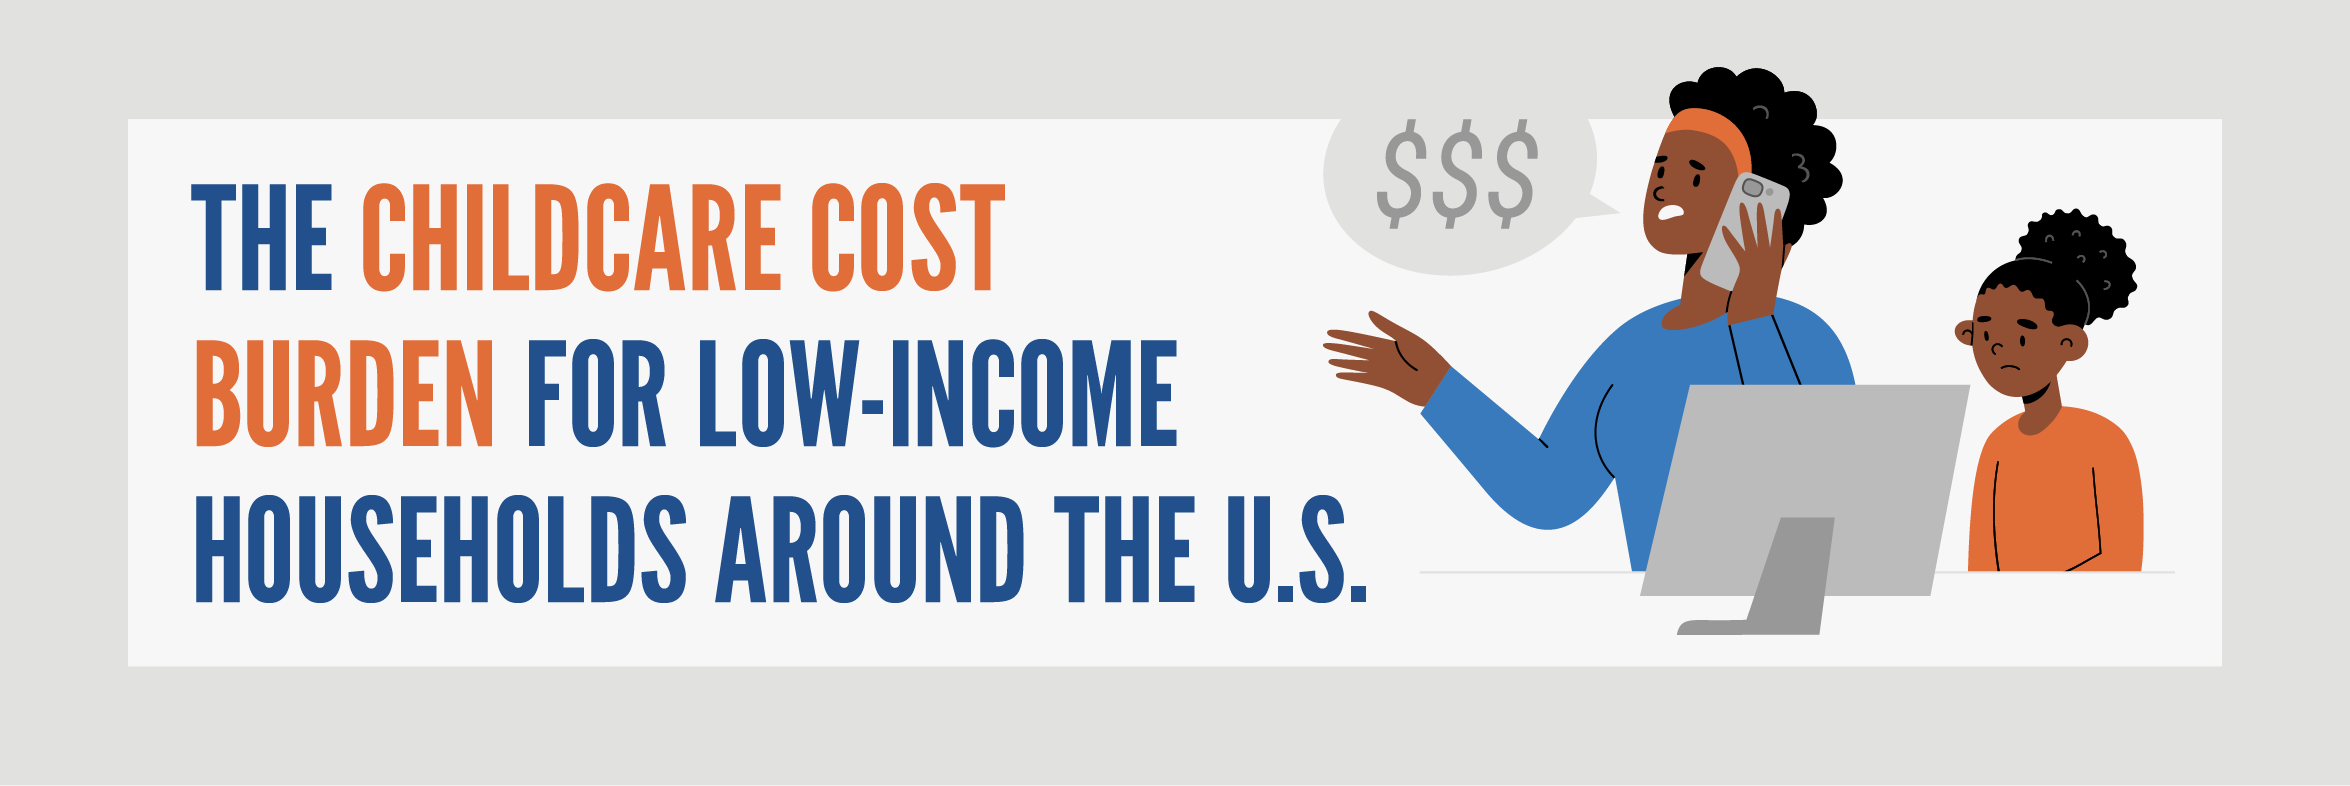 Title graphic for a blog about the childcare cost burden for low-income households around the U.S.